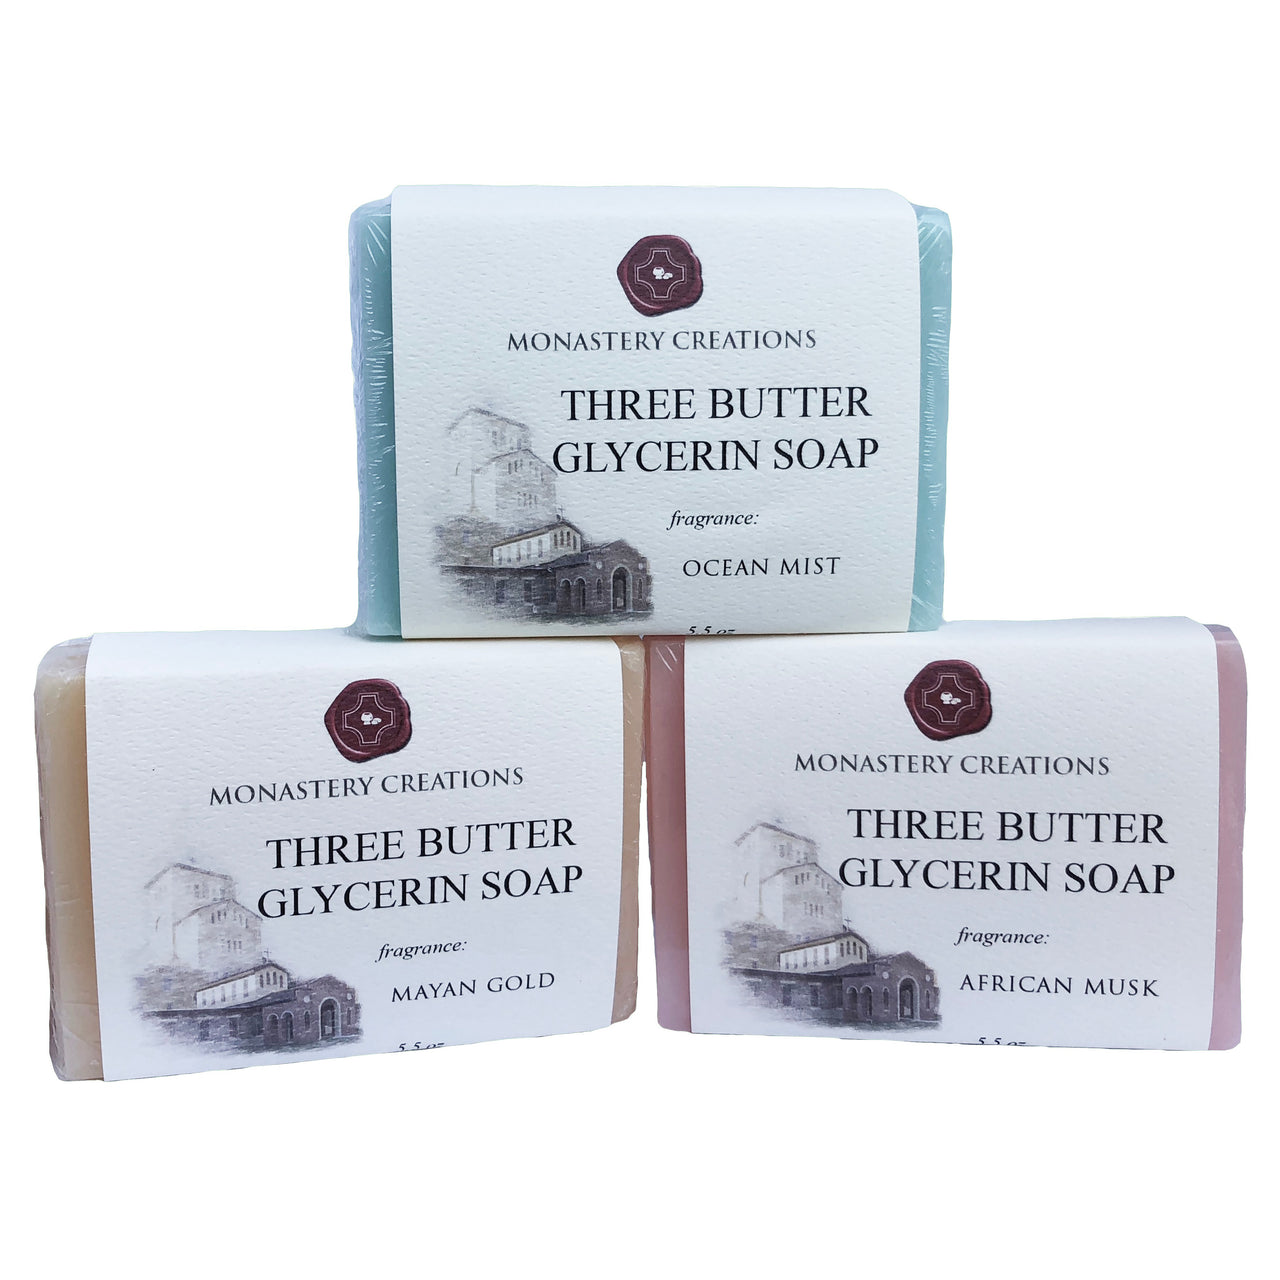 Sister Hope's Premium Three Butter Glycerin Soap Bar – Monastery Creations